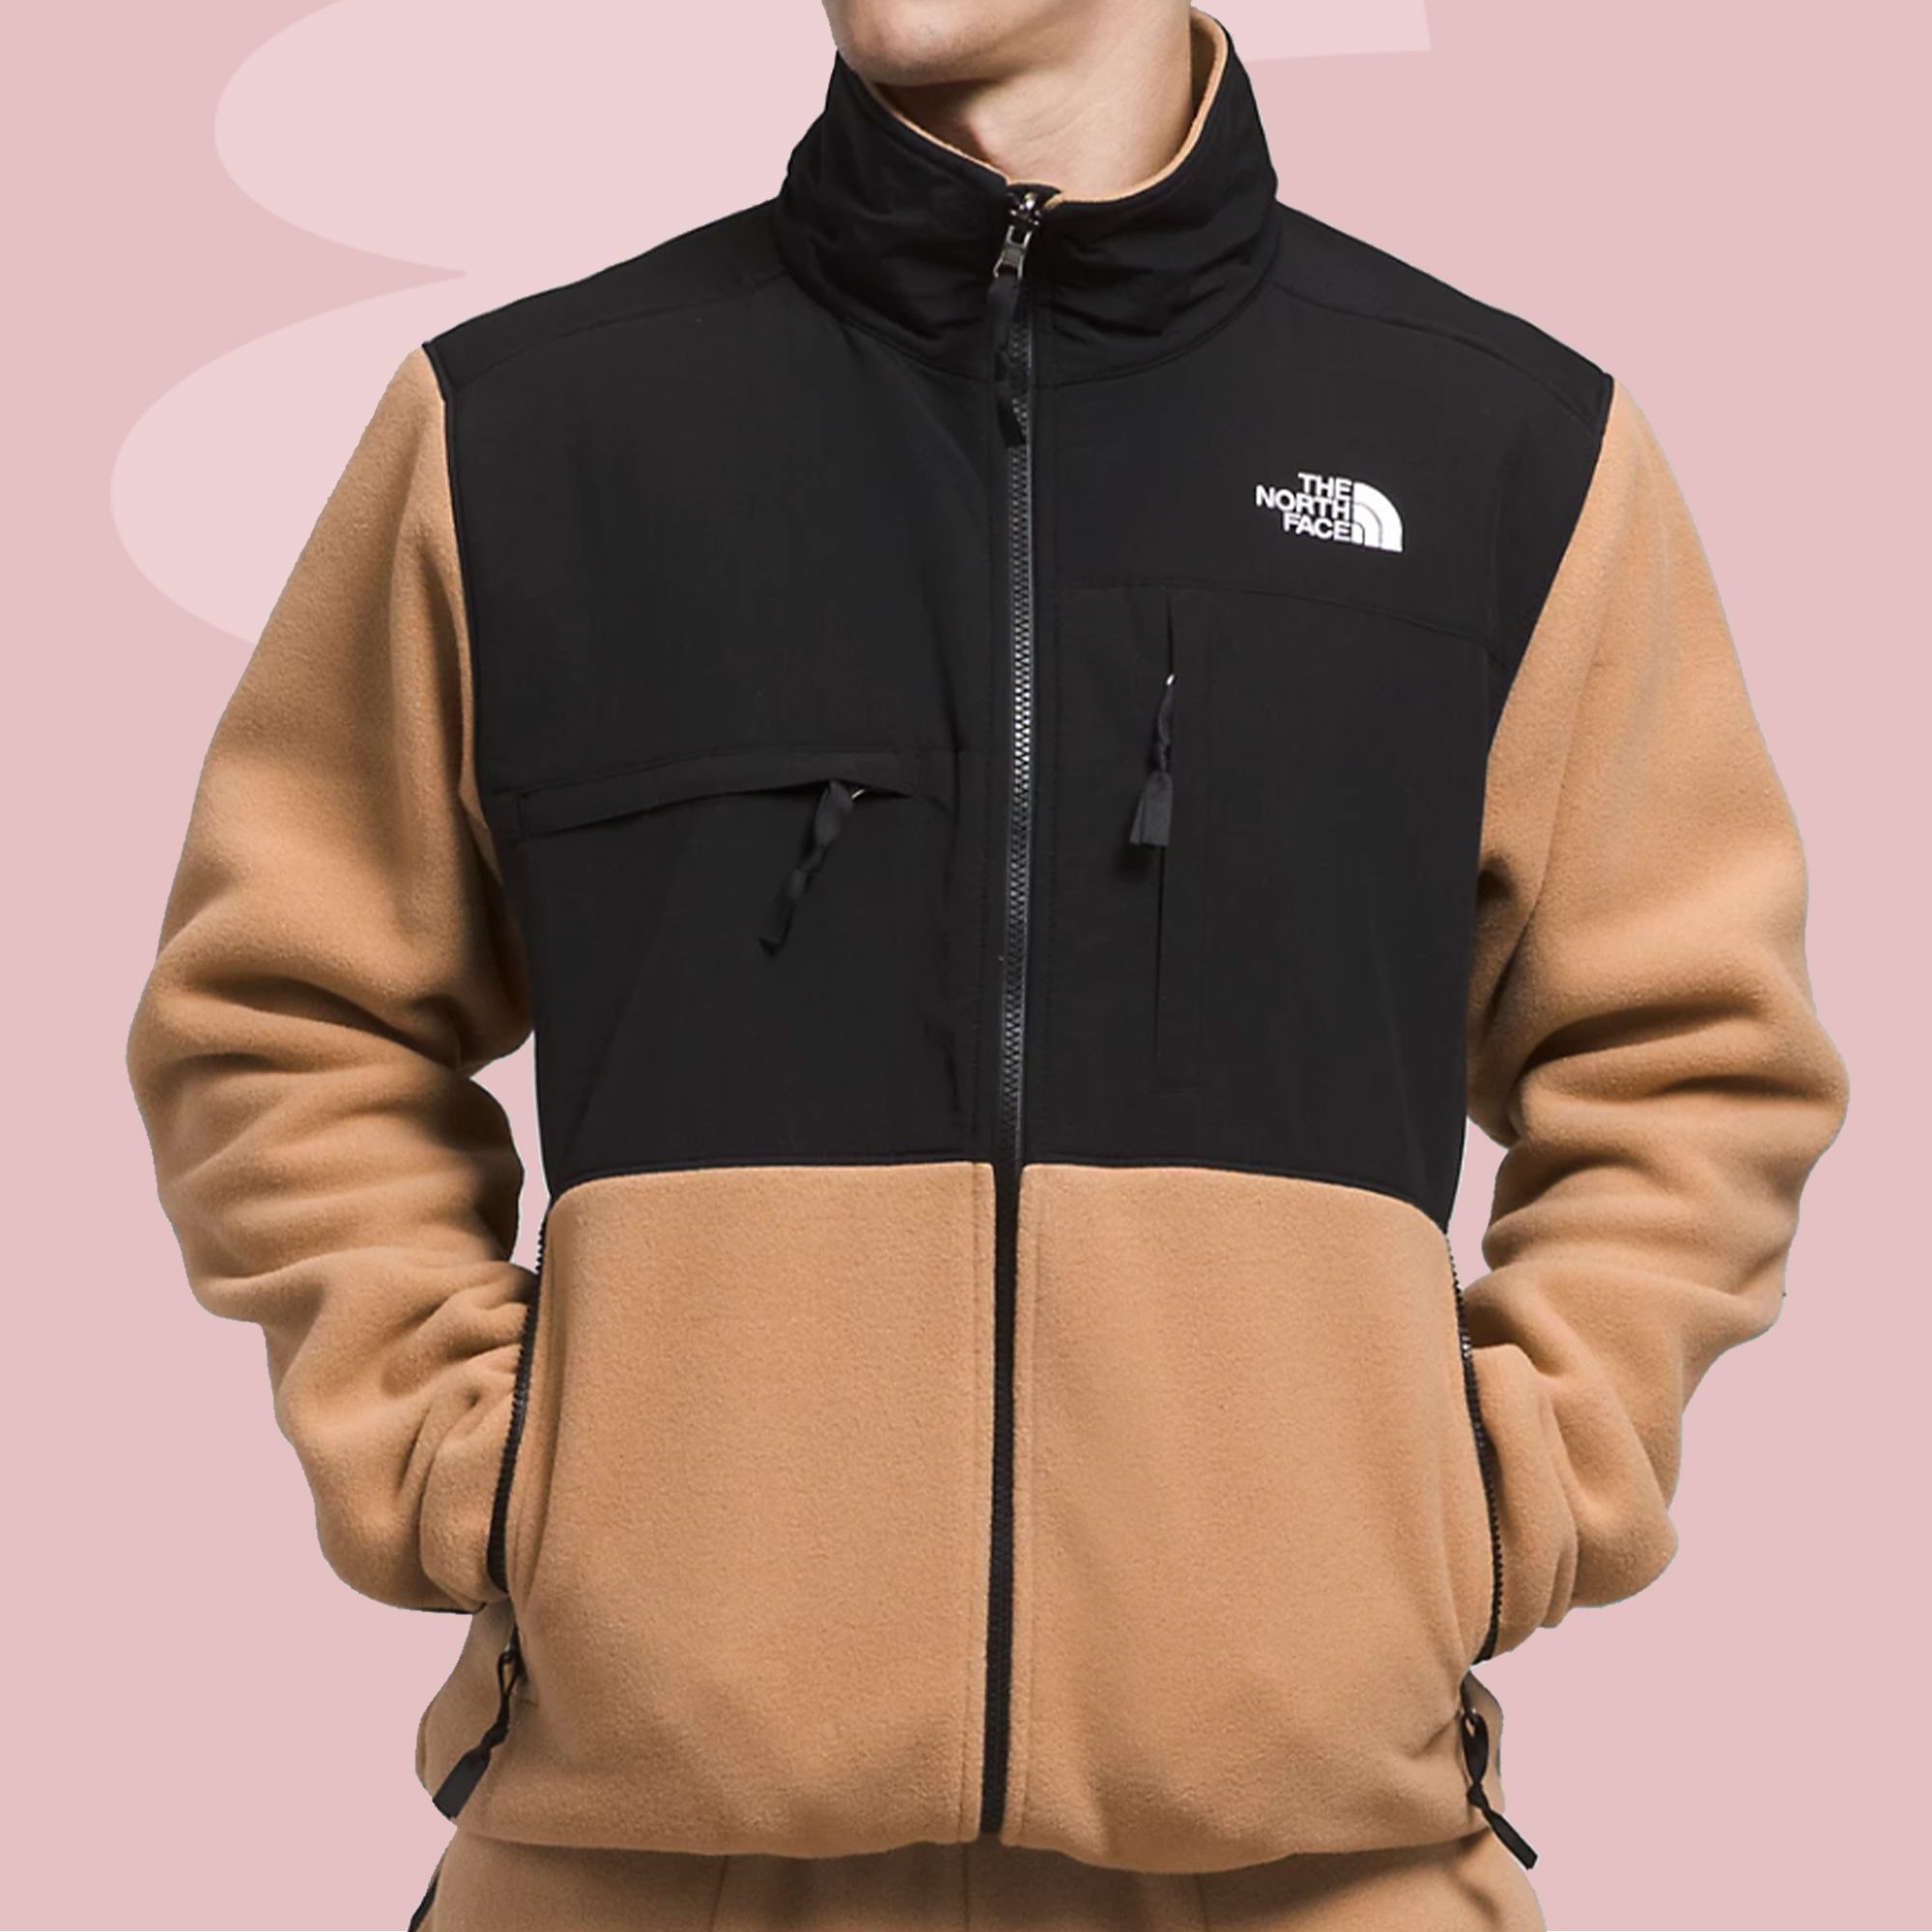 The North Face's Sale Feels Too Good to Be True